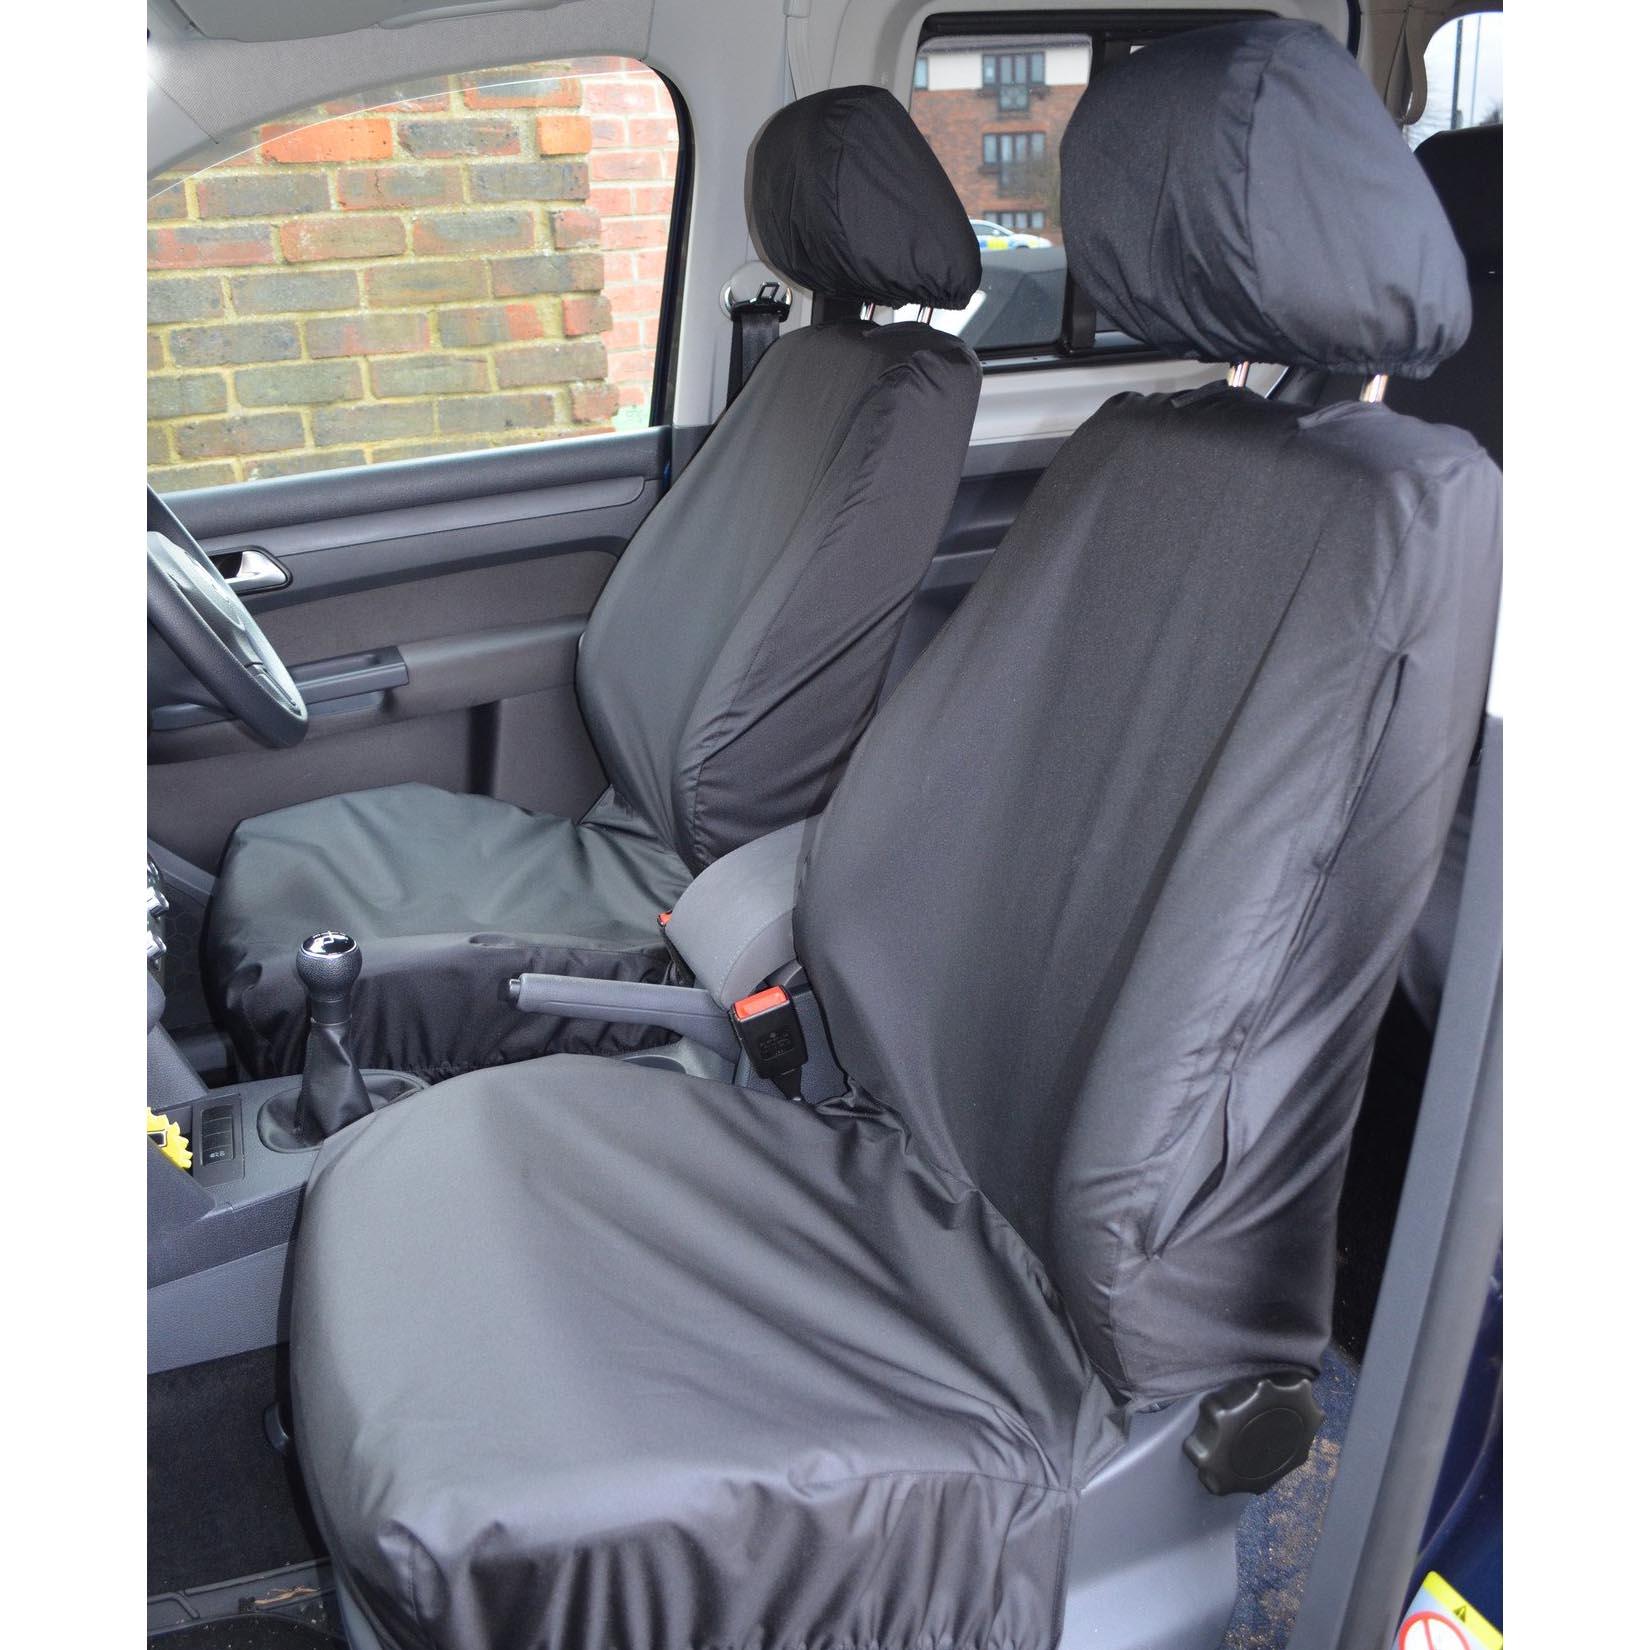 VW CADDY 2004-2021 TAILORED FRONT SEAT COVERS - BLACK - Storm Xccessories2